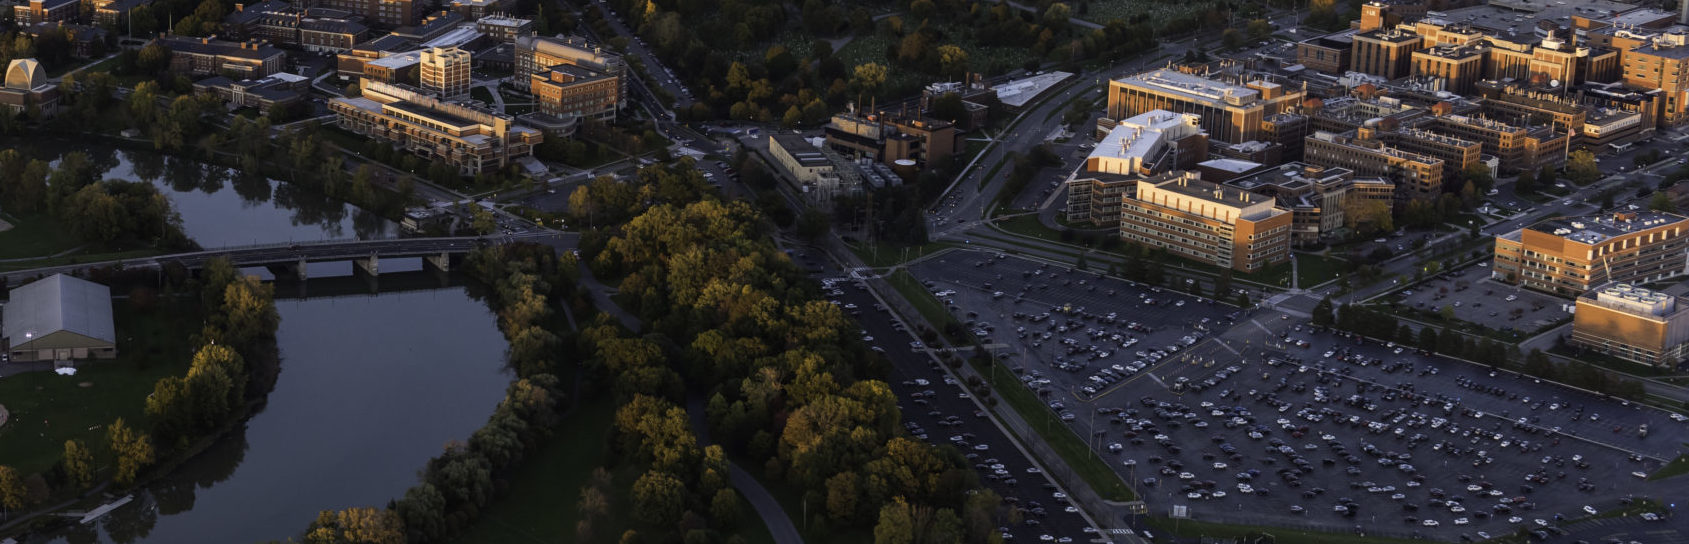 Aerial photo of University of Rochester's River Campus and Medical Center along with downtown Rochester, NY in in the evening